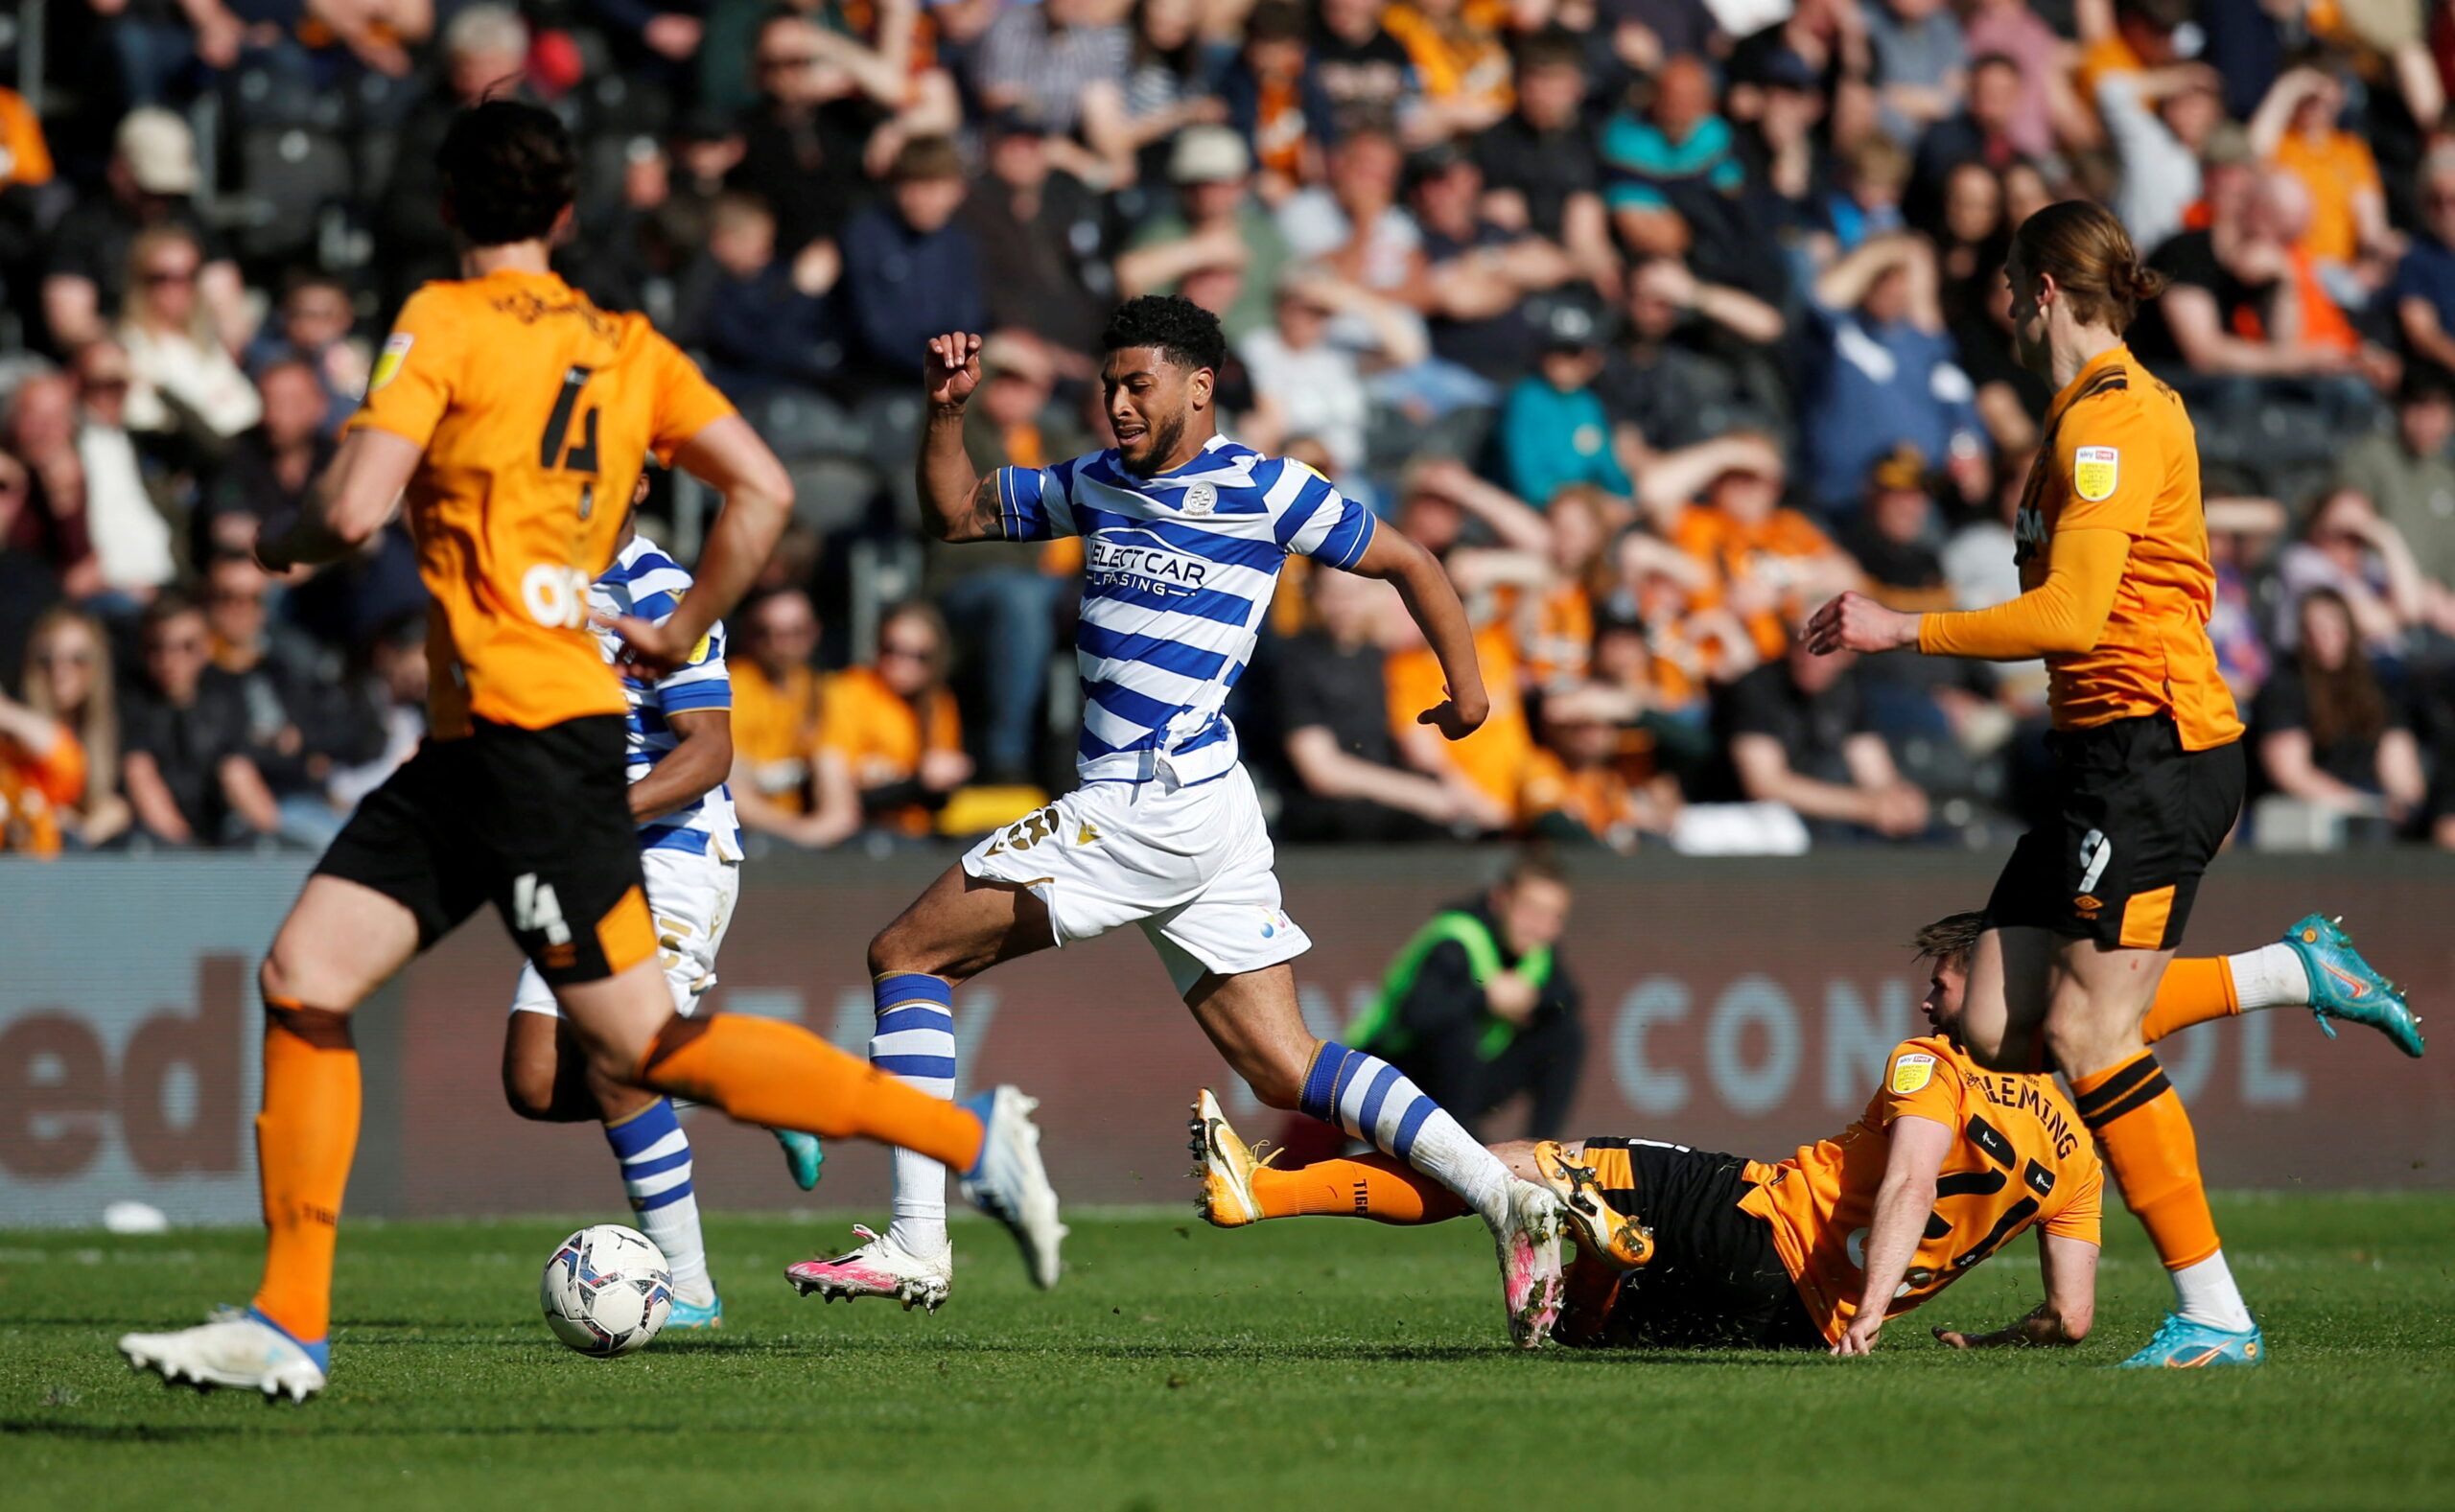 Soccer Football - Championship - Hull City v Reading - MKM Stadium, Hull, Britain - April 23, 2022 Reading's Josh Laurent in action  Action Images/Ed Sykes  EDITORIAL USE ONLY. No use with unauthorized audio, video, data, fixture lists, club/league logos or 